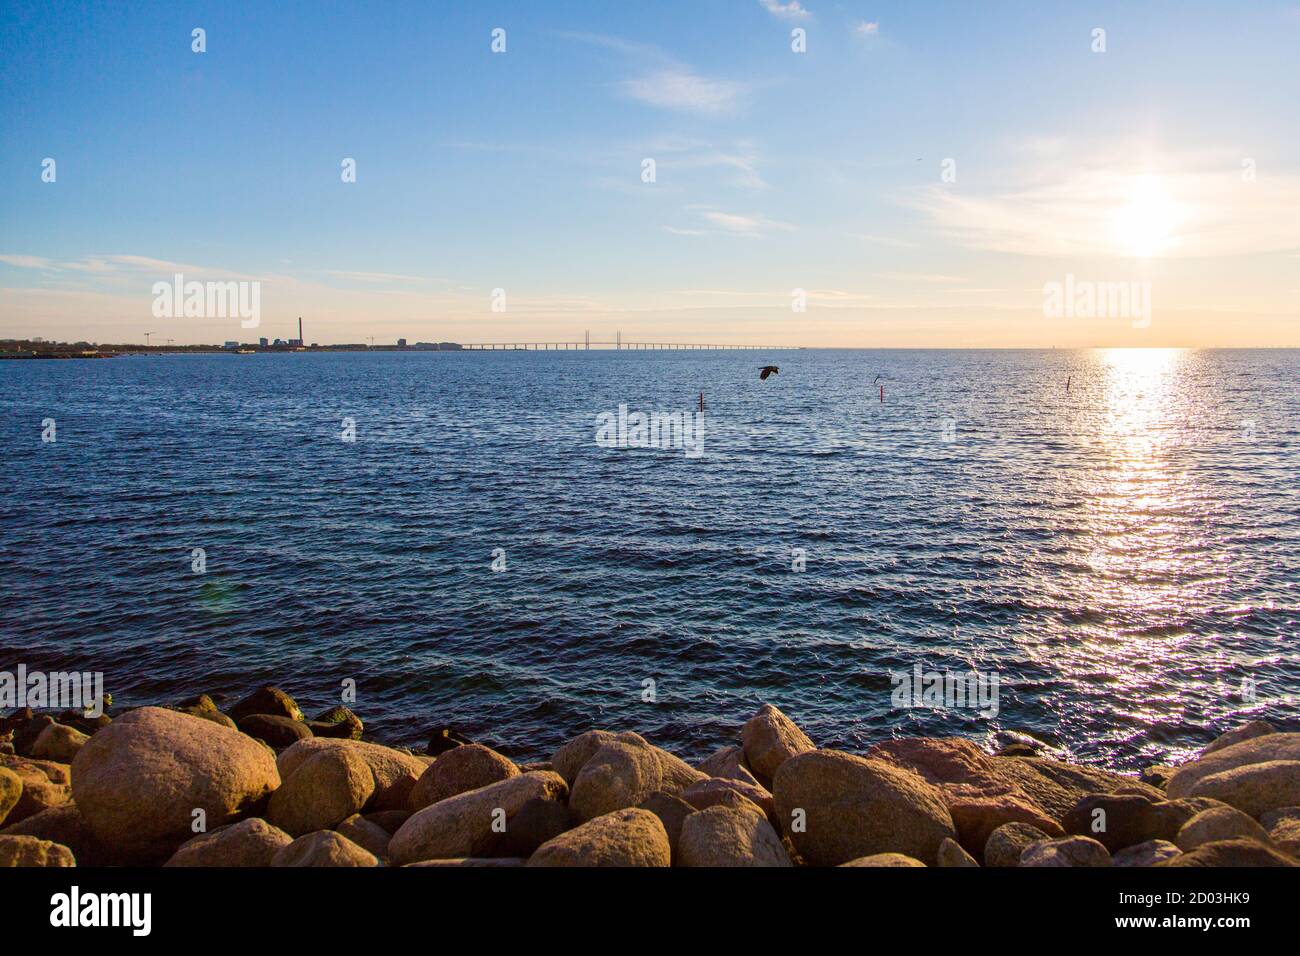 Landscape of the sea with the Oresund bridge-tunnel under the sunlight in Sweden and Denmark Stock Photo